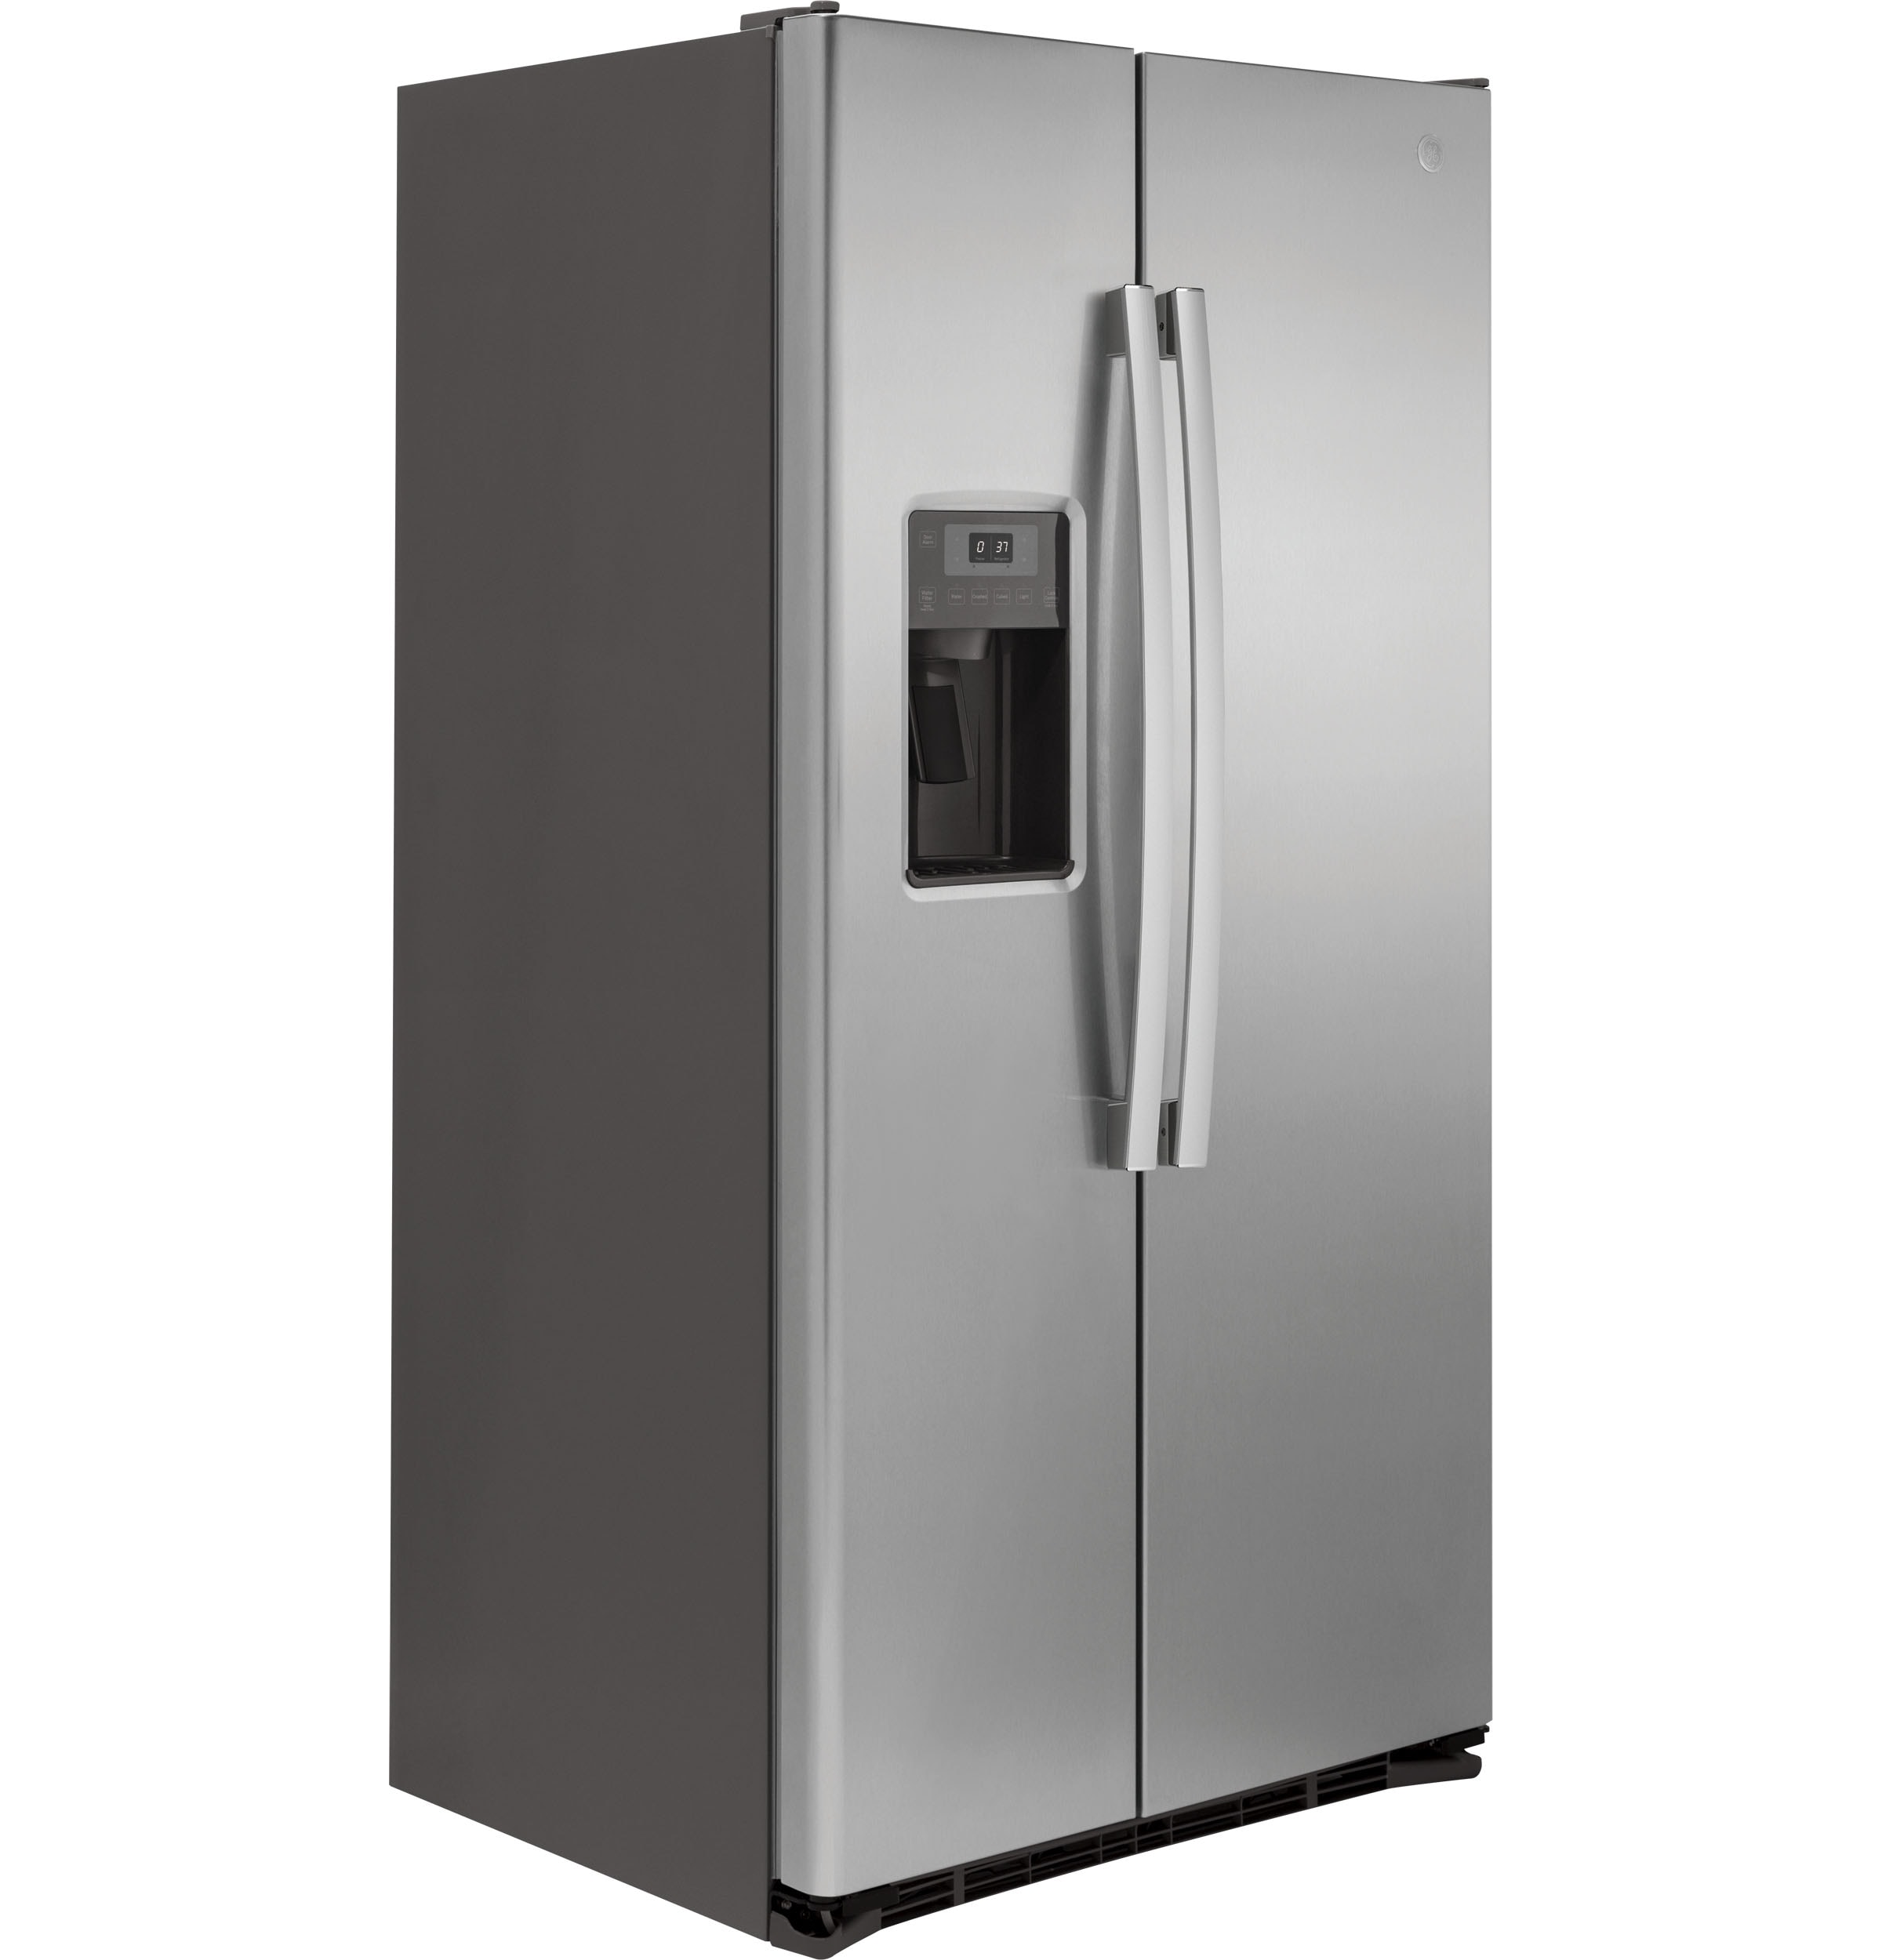 GE 21.9-cu ft Counter-Depth Side-by-Side Refrigerator with Ice